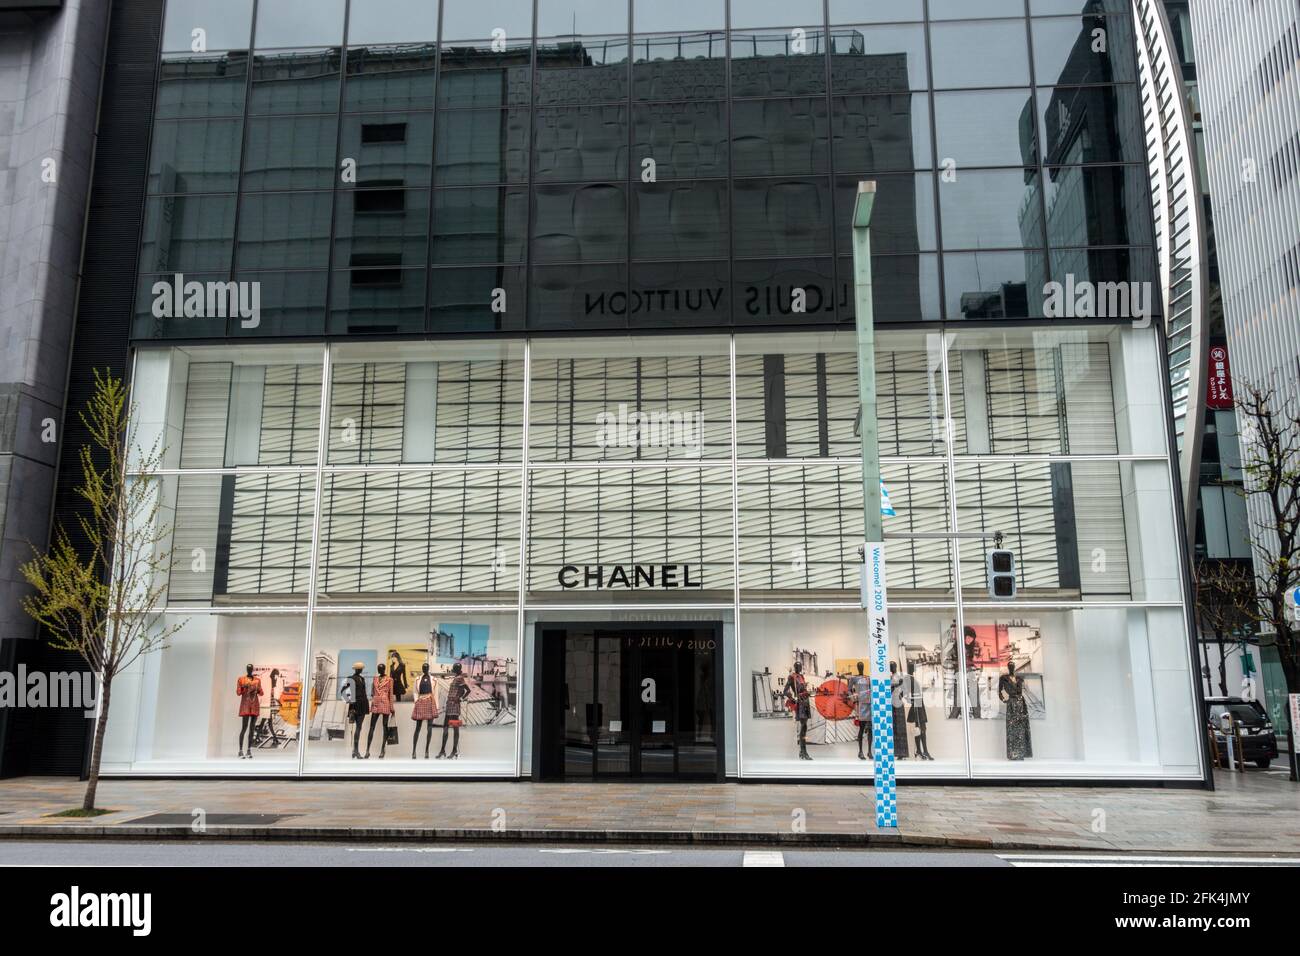 Tokyo, Japan, March 29, 2020: Facade of Chanel store closed during COVID-19  pandemic. French luxury fashion house, It focuses on women's high fashion  Stock Photo - Alamy